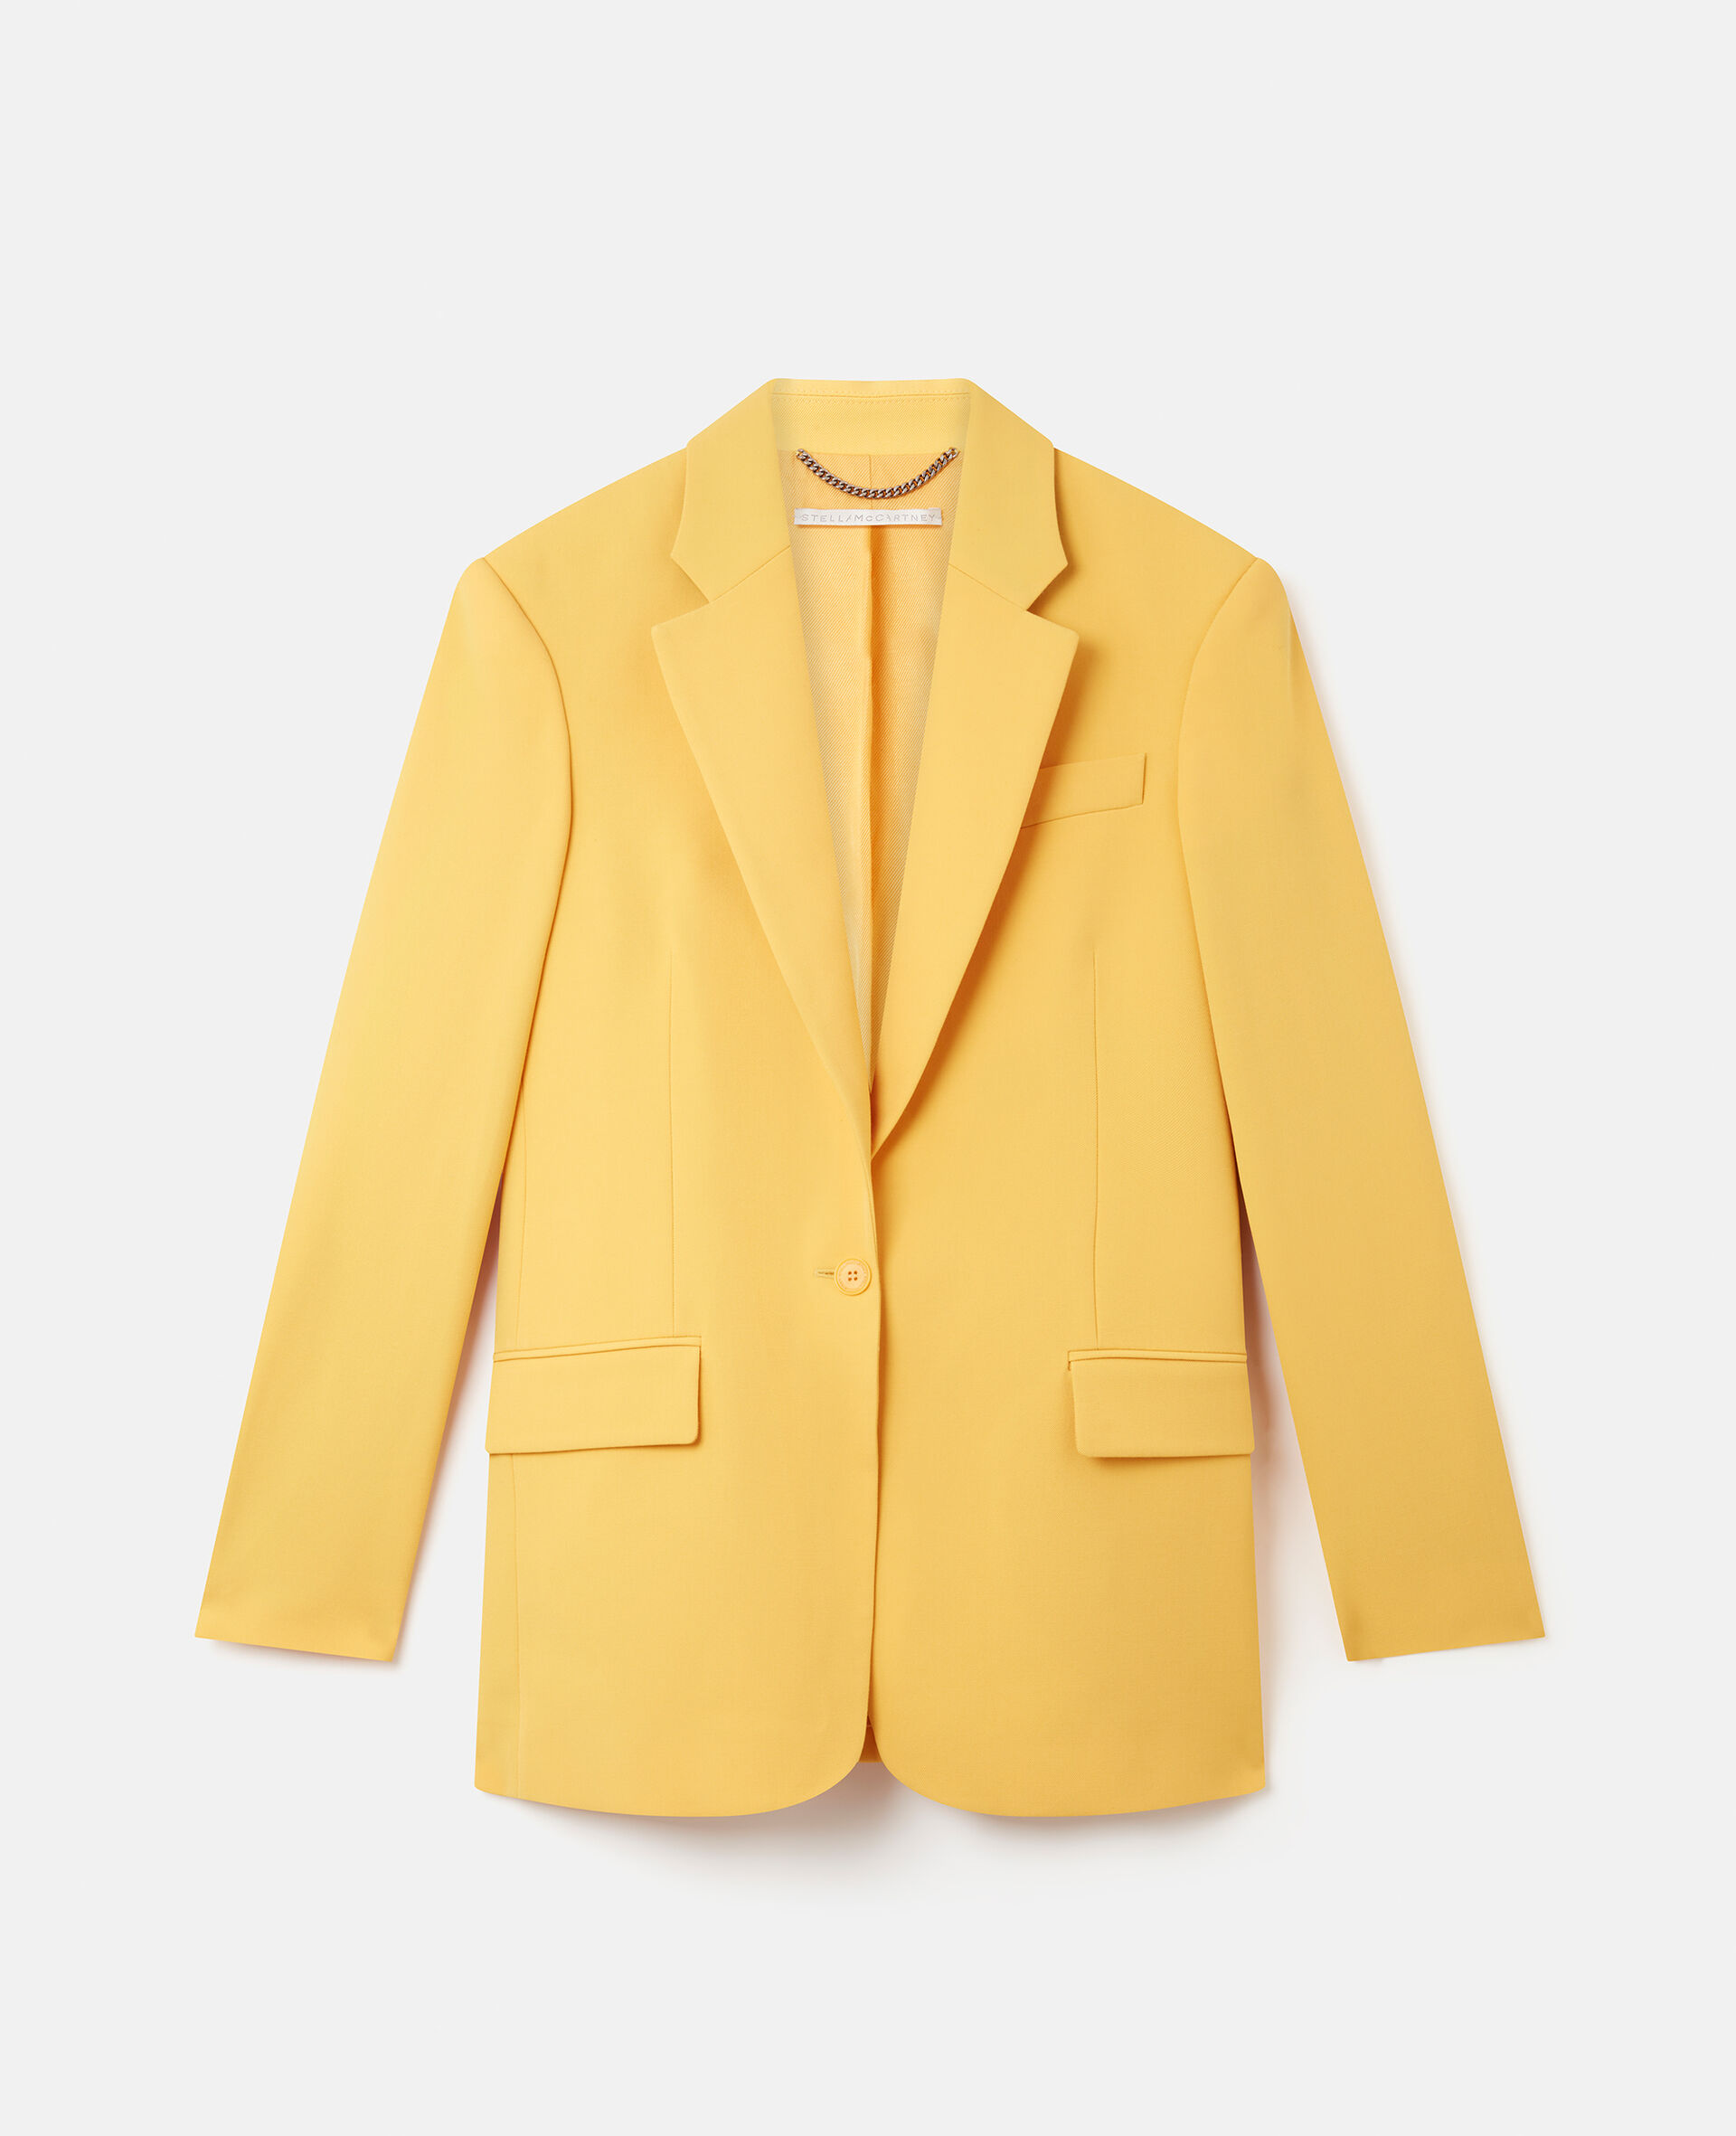 Wool Twill Single-Breasted Blazer-Yellow-large image number 0